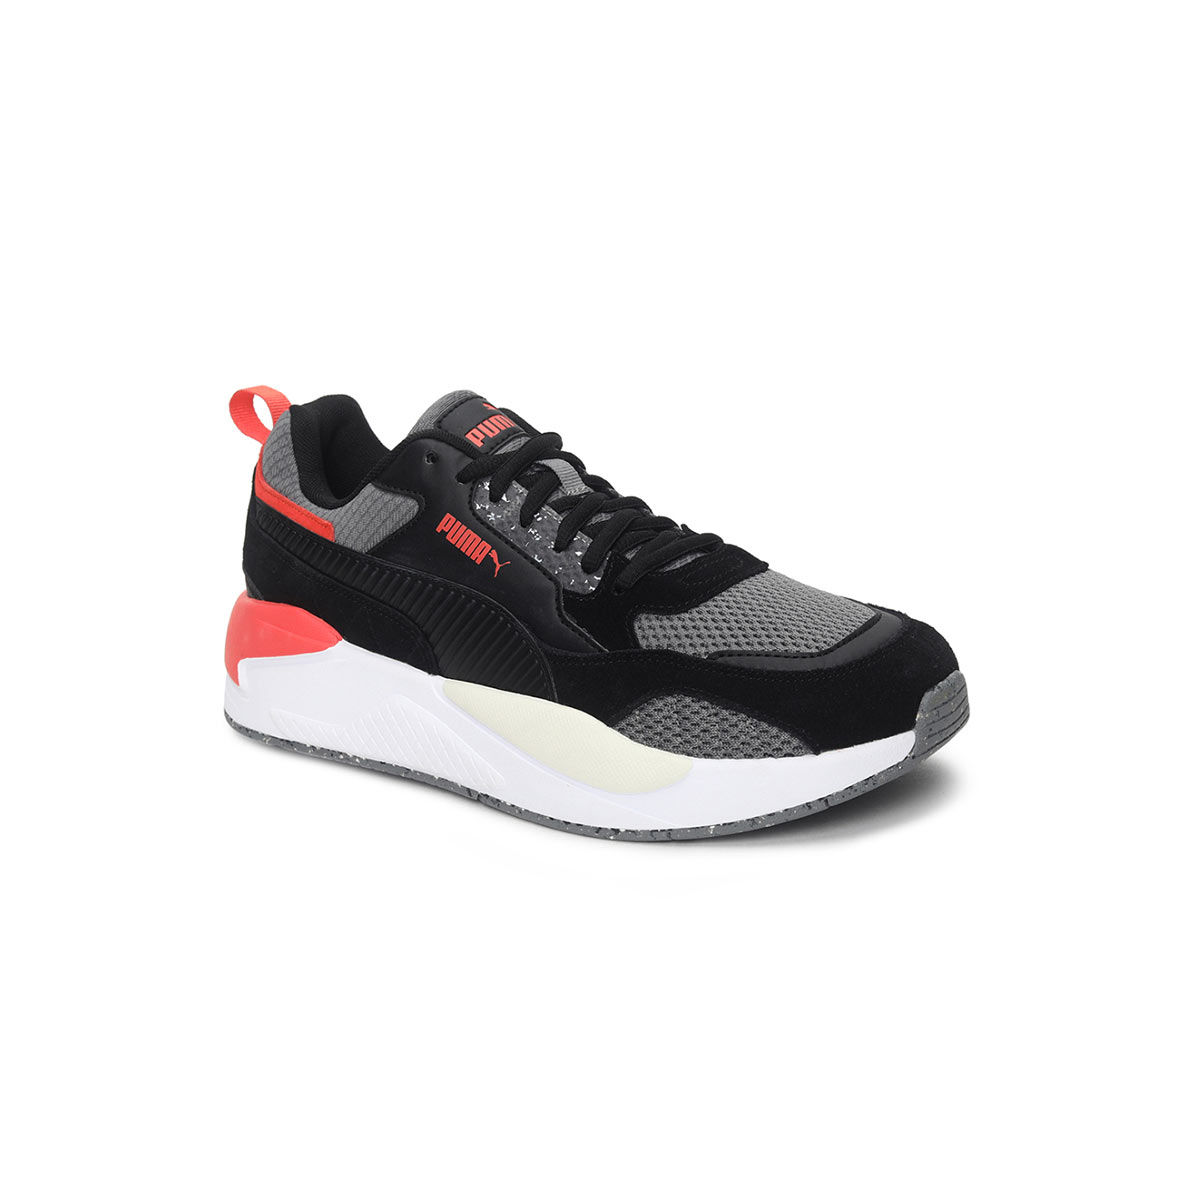 Sneakers　Best　Square　in　Sneakers　(UK　Square　Price　Better　India　Unisex　12):　Puma　X-RayÂ²　Gray　Buy　X-RayÂ²　Puma　Better　Unisex　12)　(UK　at　Nykaa　Gray　Online